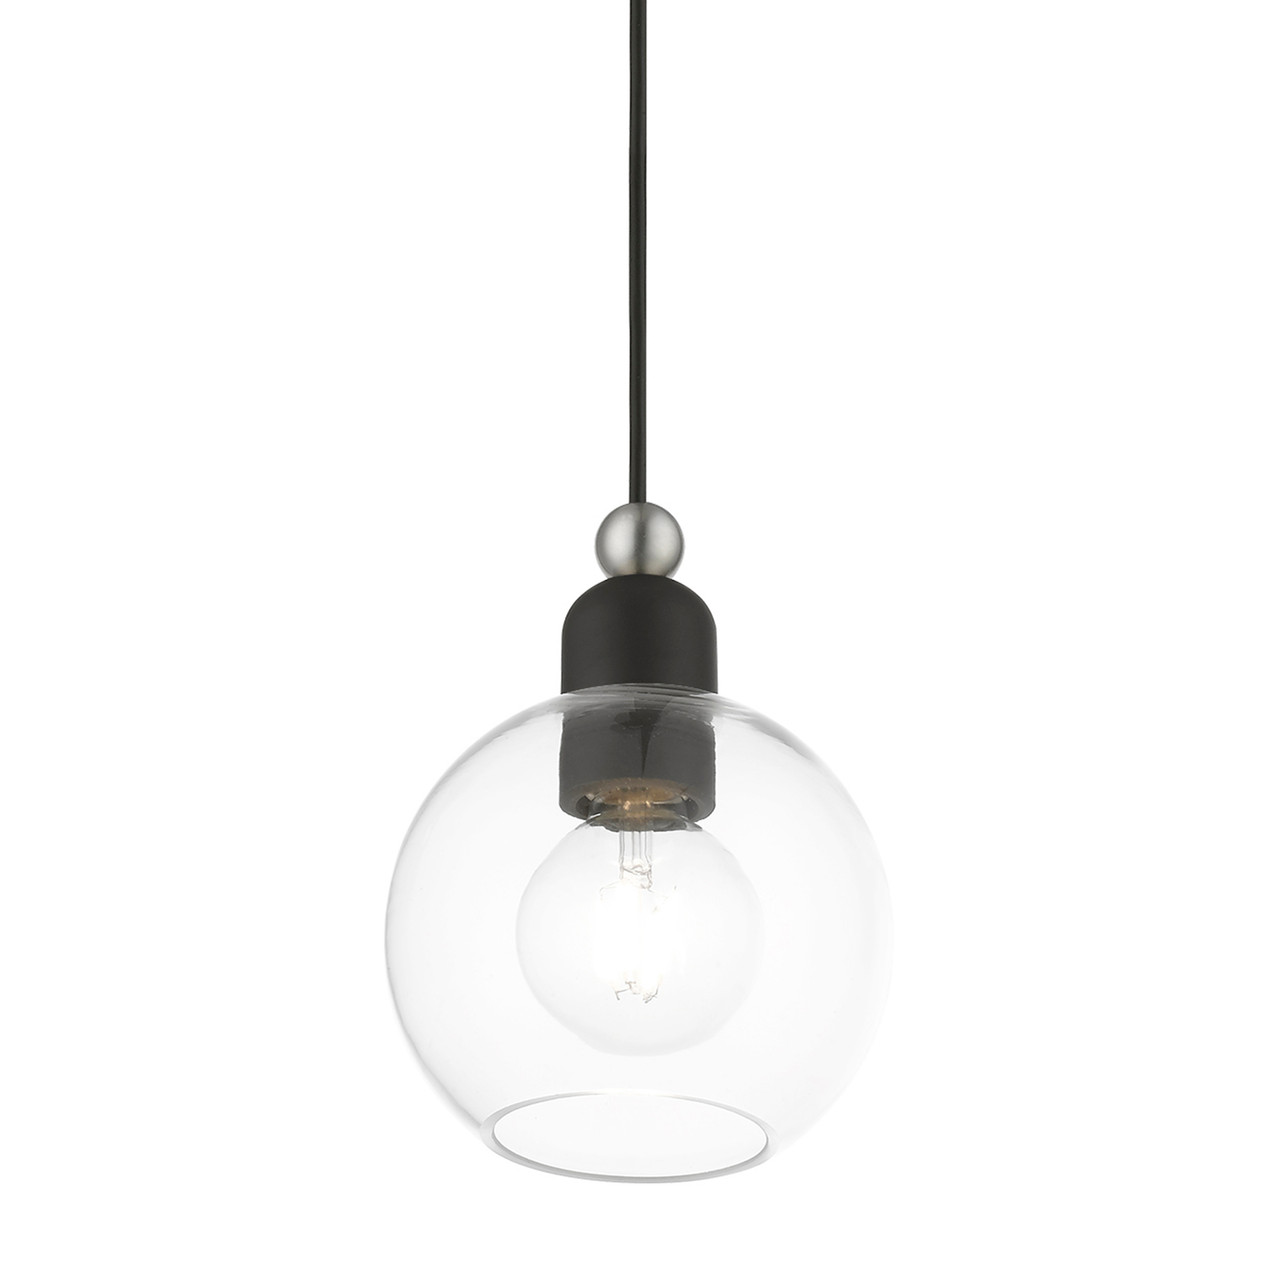 LIVEX LIGHTING 48971-04 1 Light Black with Brushed Nickel Accents Sphere Mini Pendant